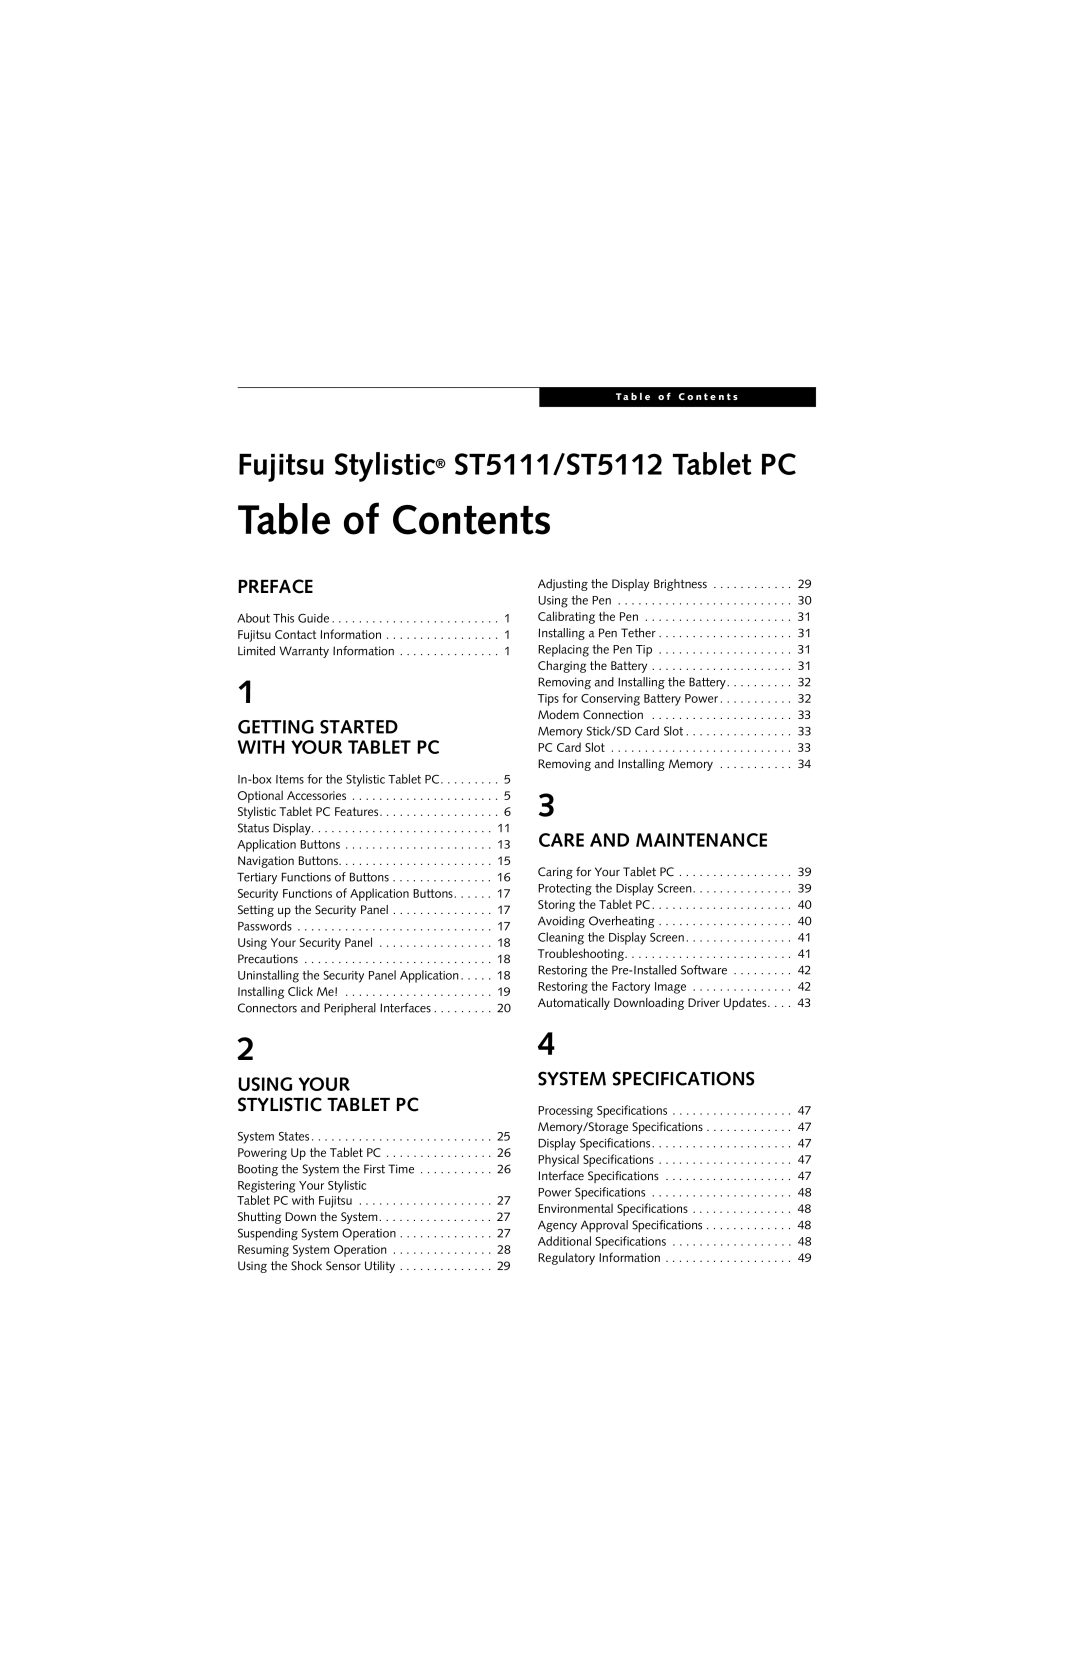 Fujitsu ST5111, ST5112 manual Table of Contents 